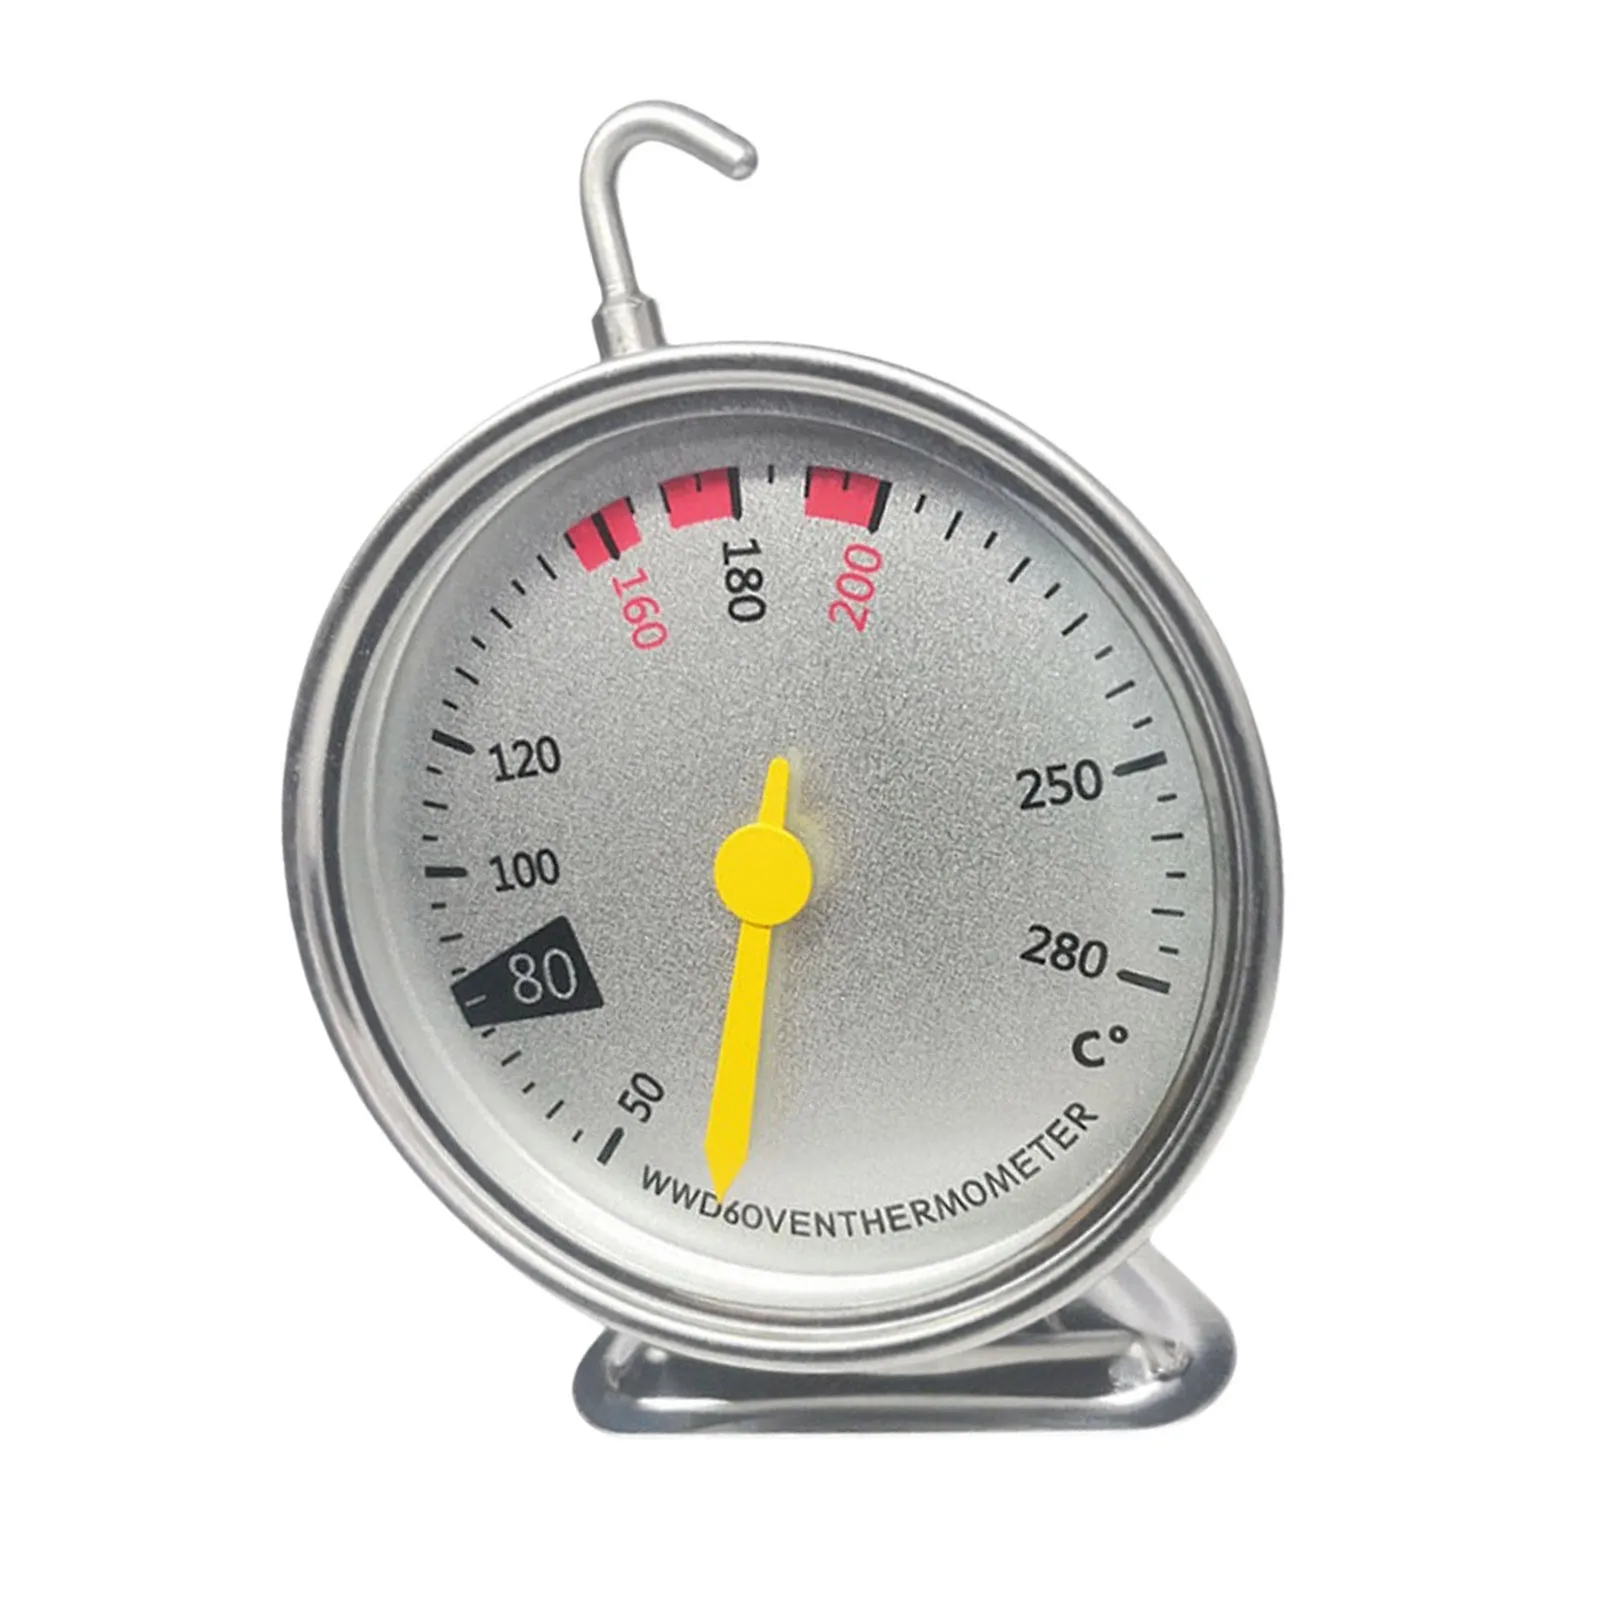 

Oven Thermometers 50-280C/100-536F Oven Baking Chef Thermometer Instant Read Oven Temperature Gauge Stainless Steel Thermometer